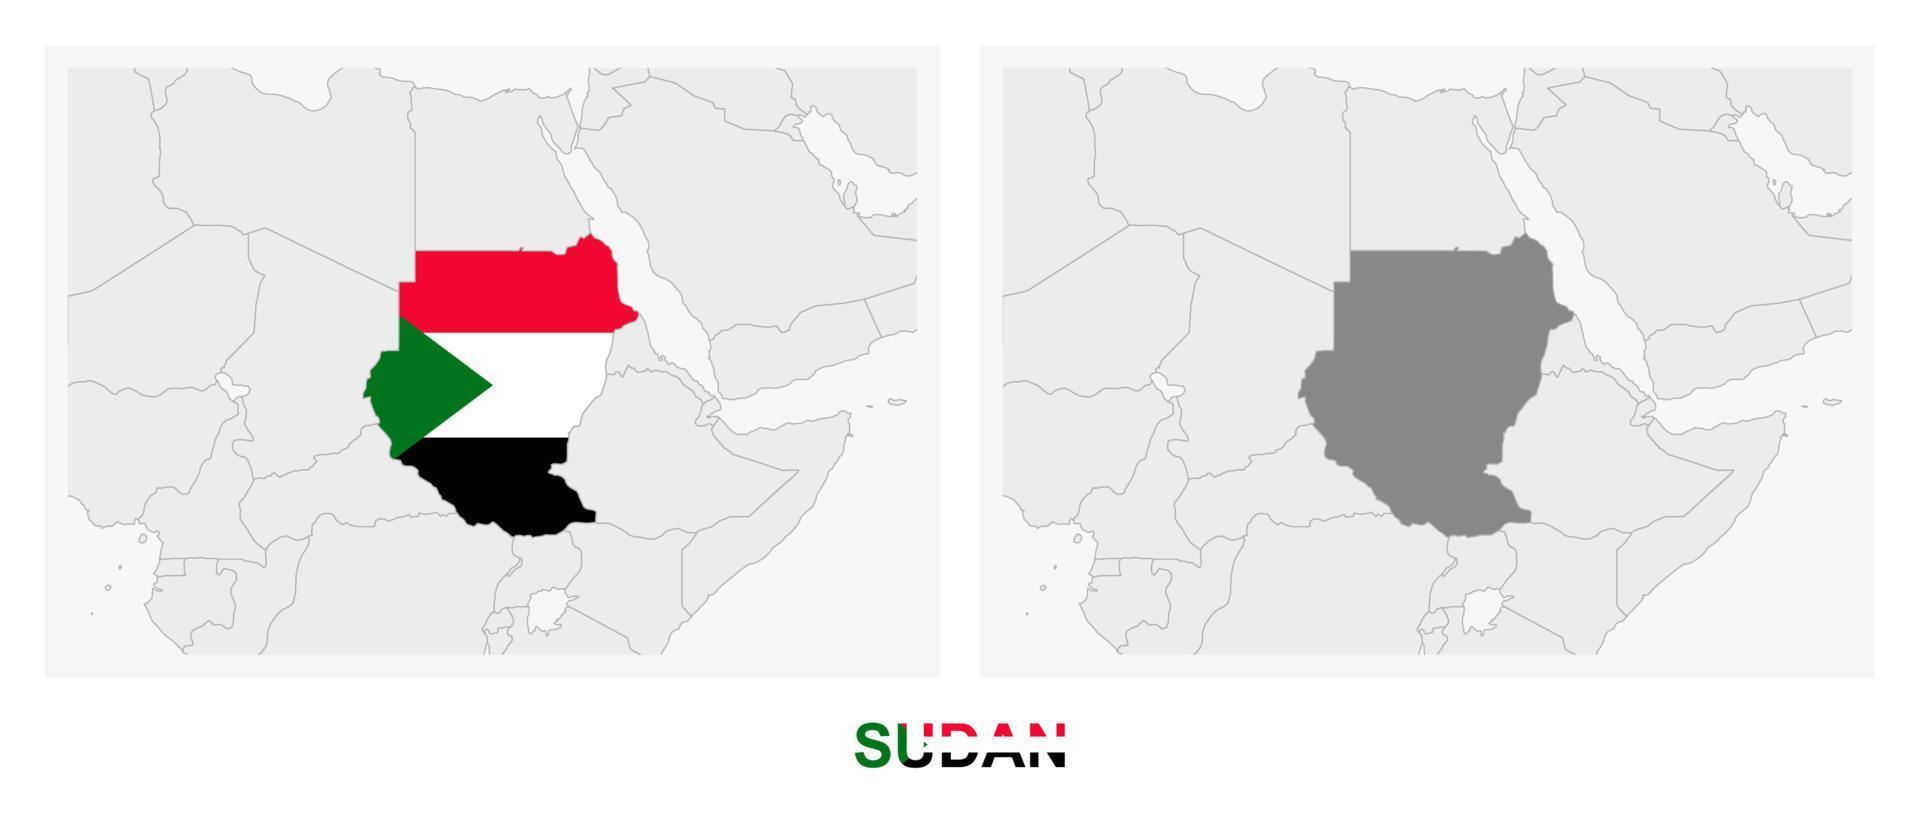 Two versions of the map of Sudan, with the flag of Sudan and highlighted in dark grey. vector